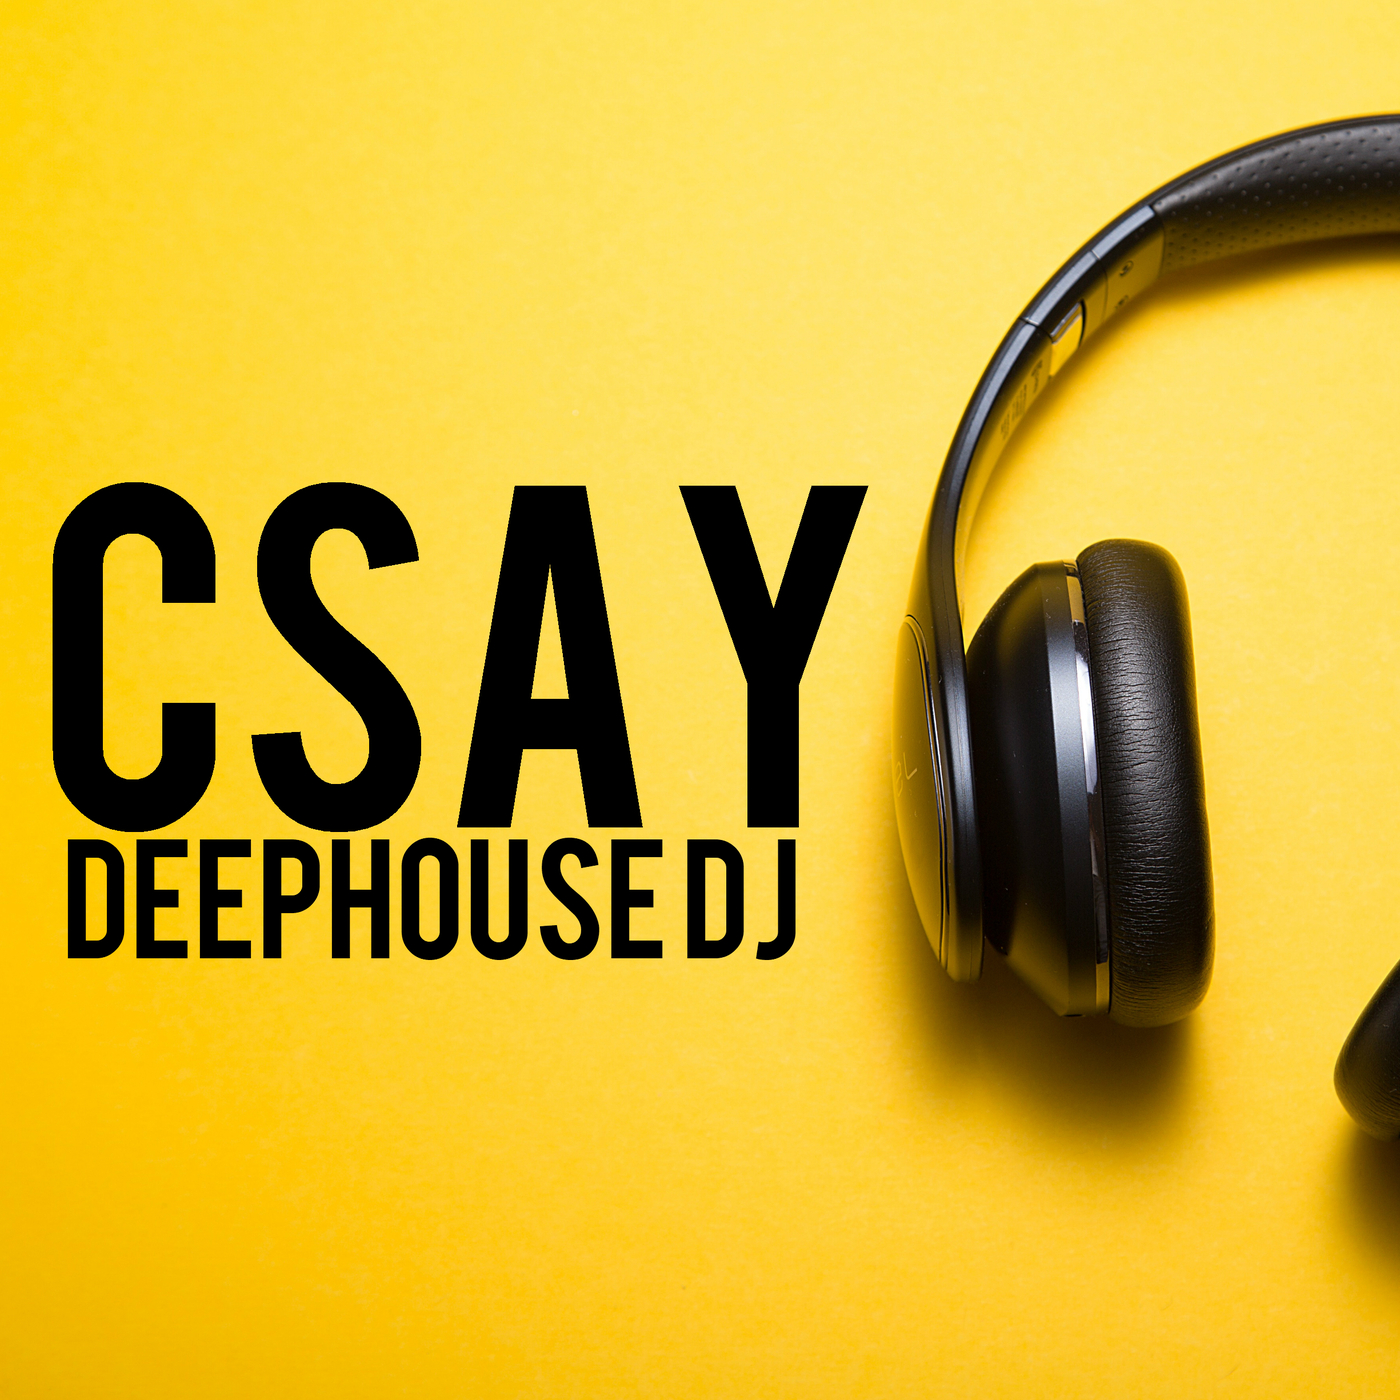 Listen Closely - Mixed by Csay